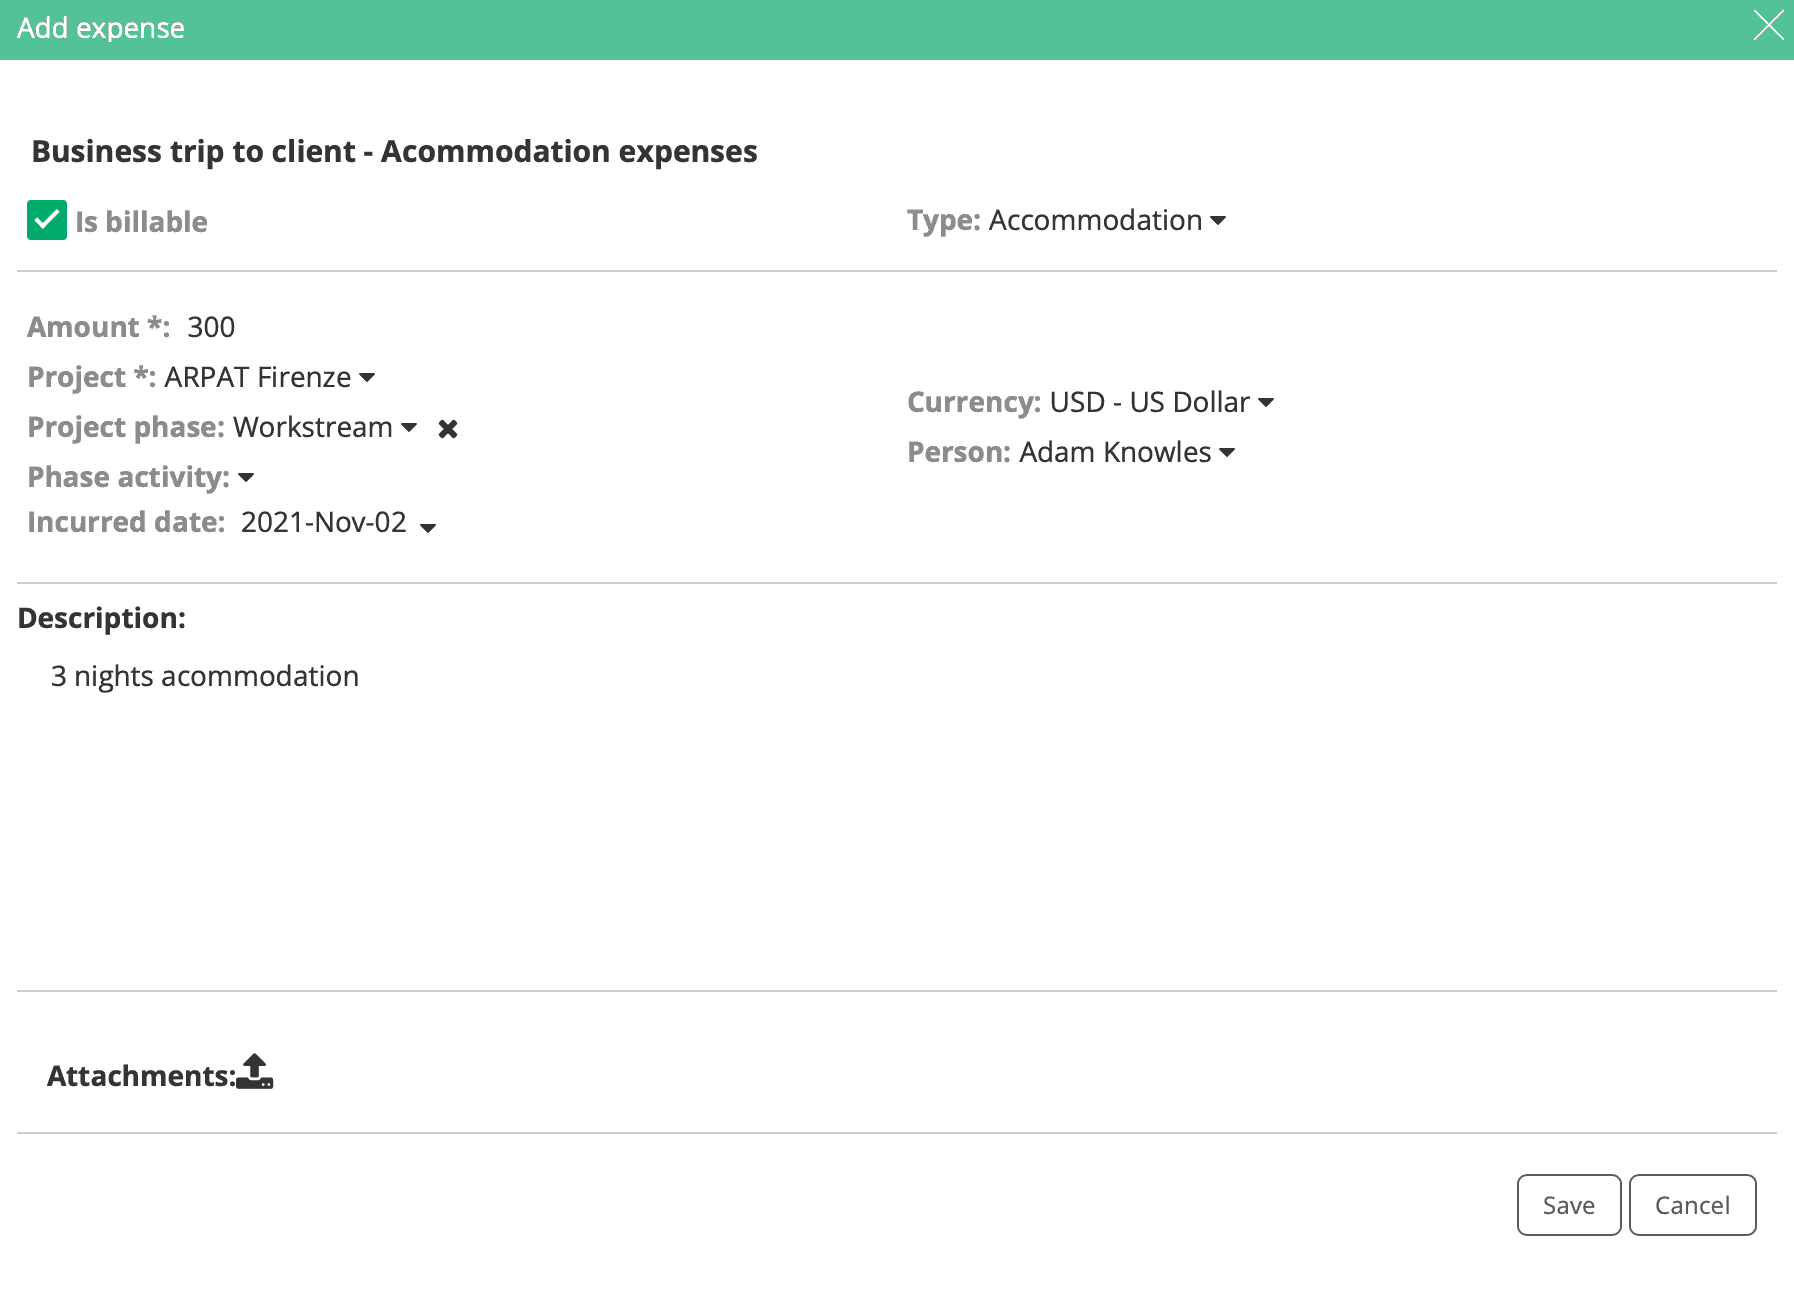 Project related expenses added to the customer's invoice.